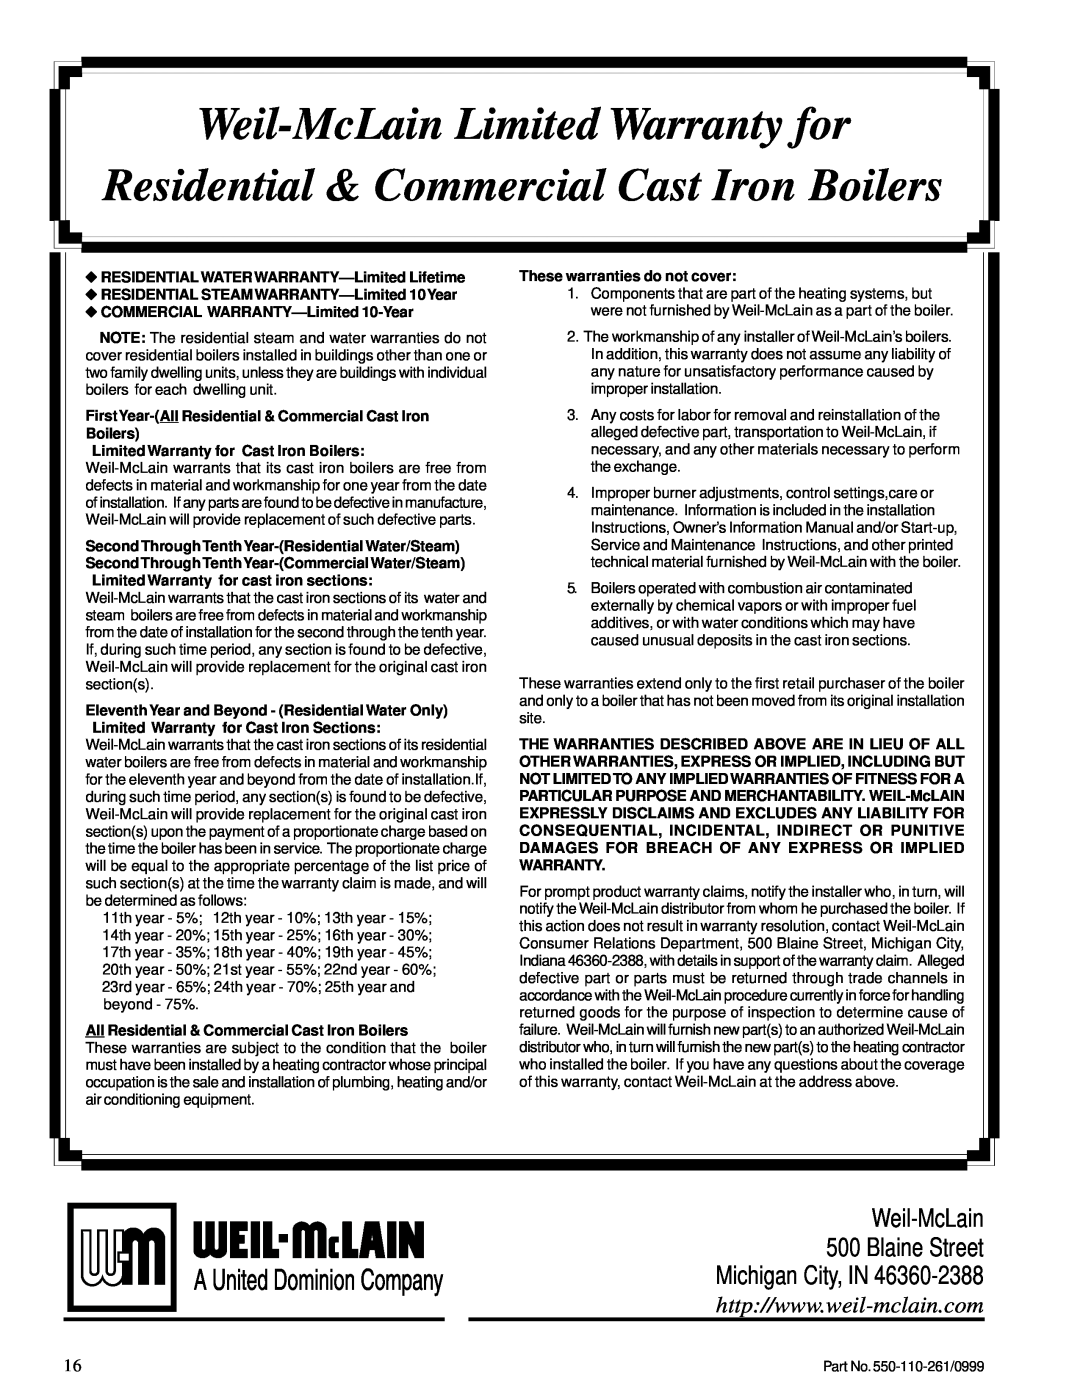 Weil-McLain GOLD CGs manual Weil-McLainLimited Warranty for, Residential & Commercial Cast Iron Boilers 